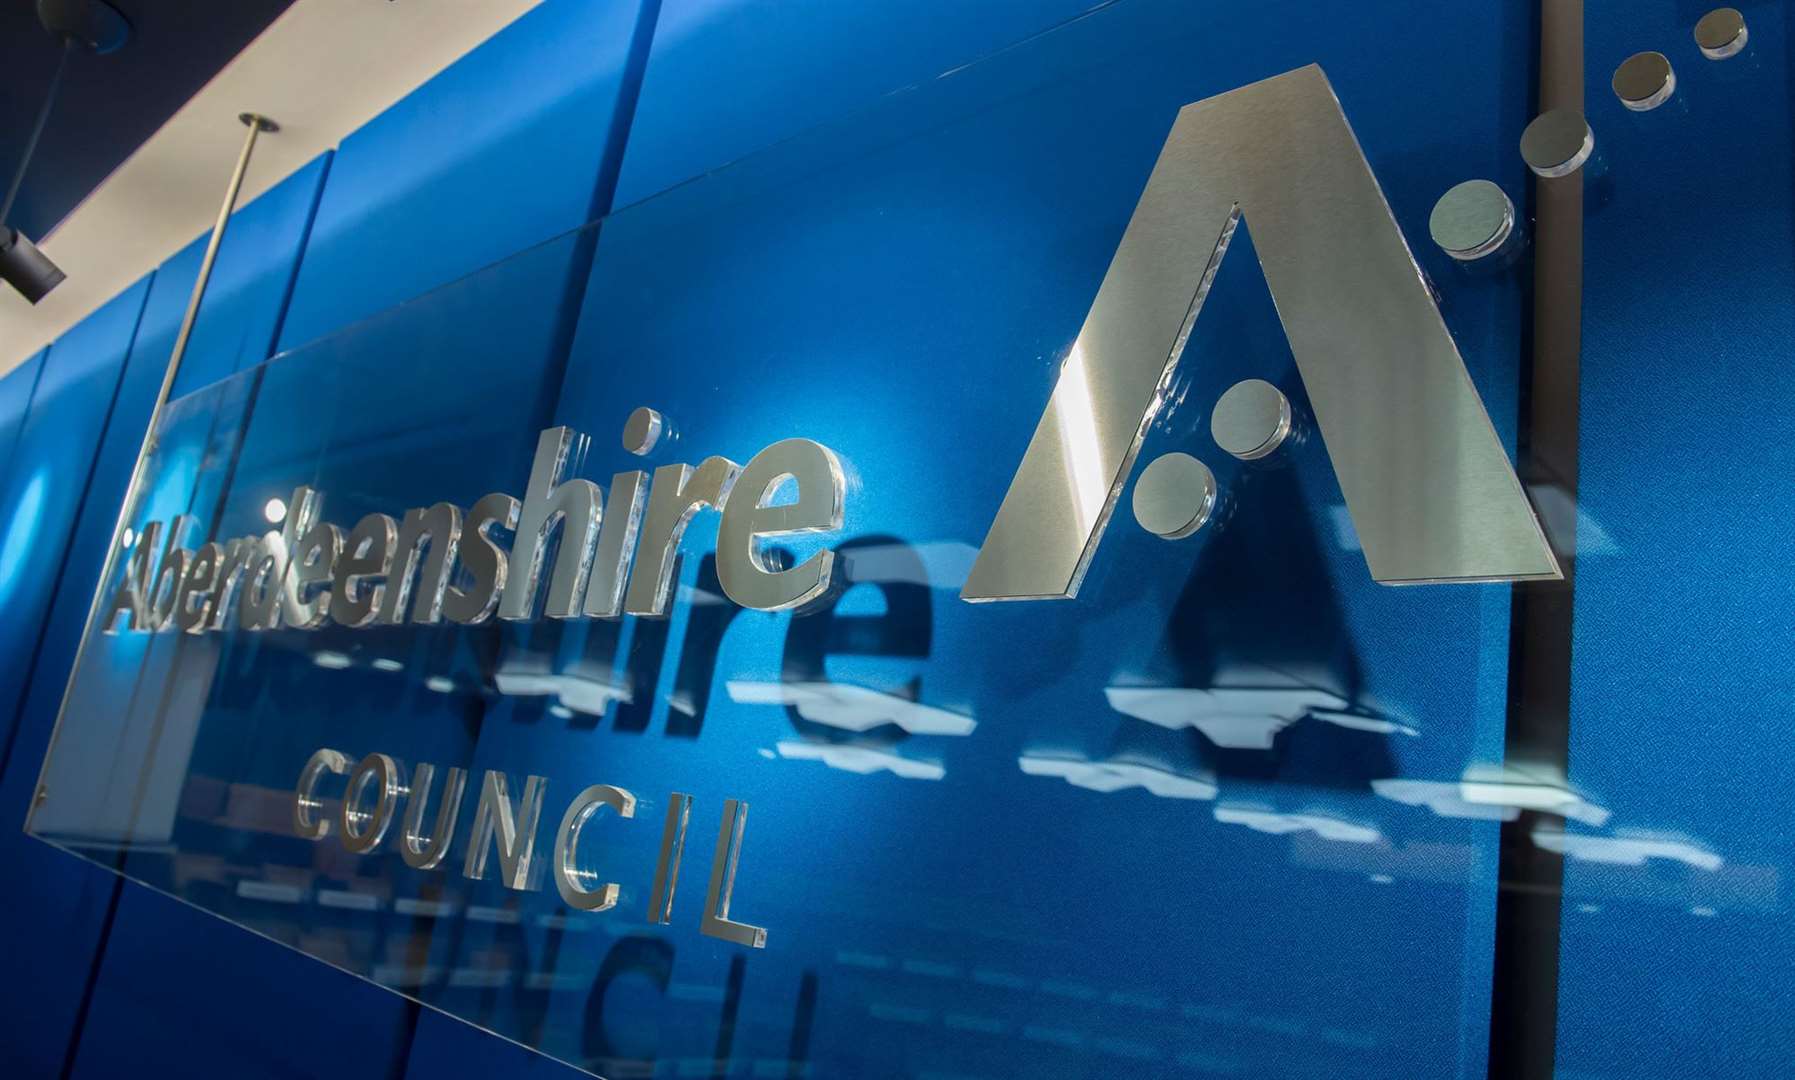 Aberdeenshire Council has provided an update after flood warnings were issued.